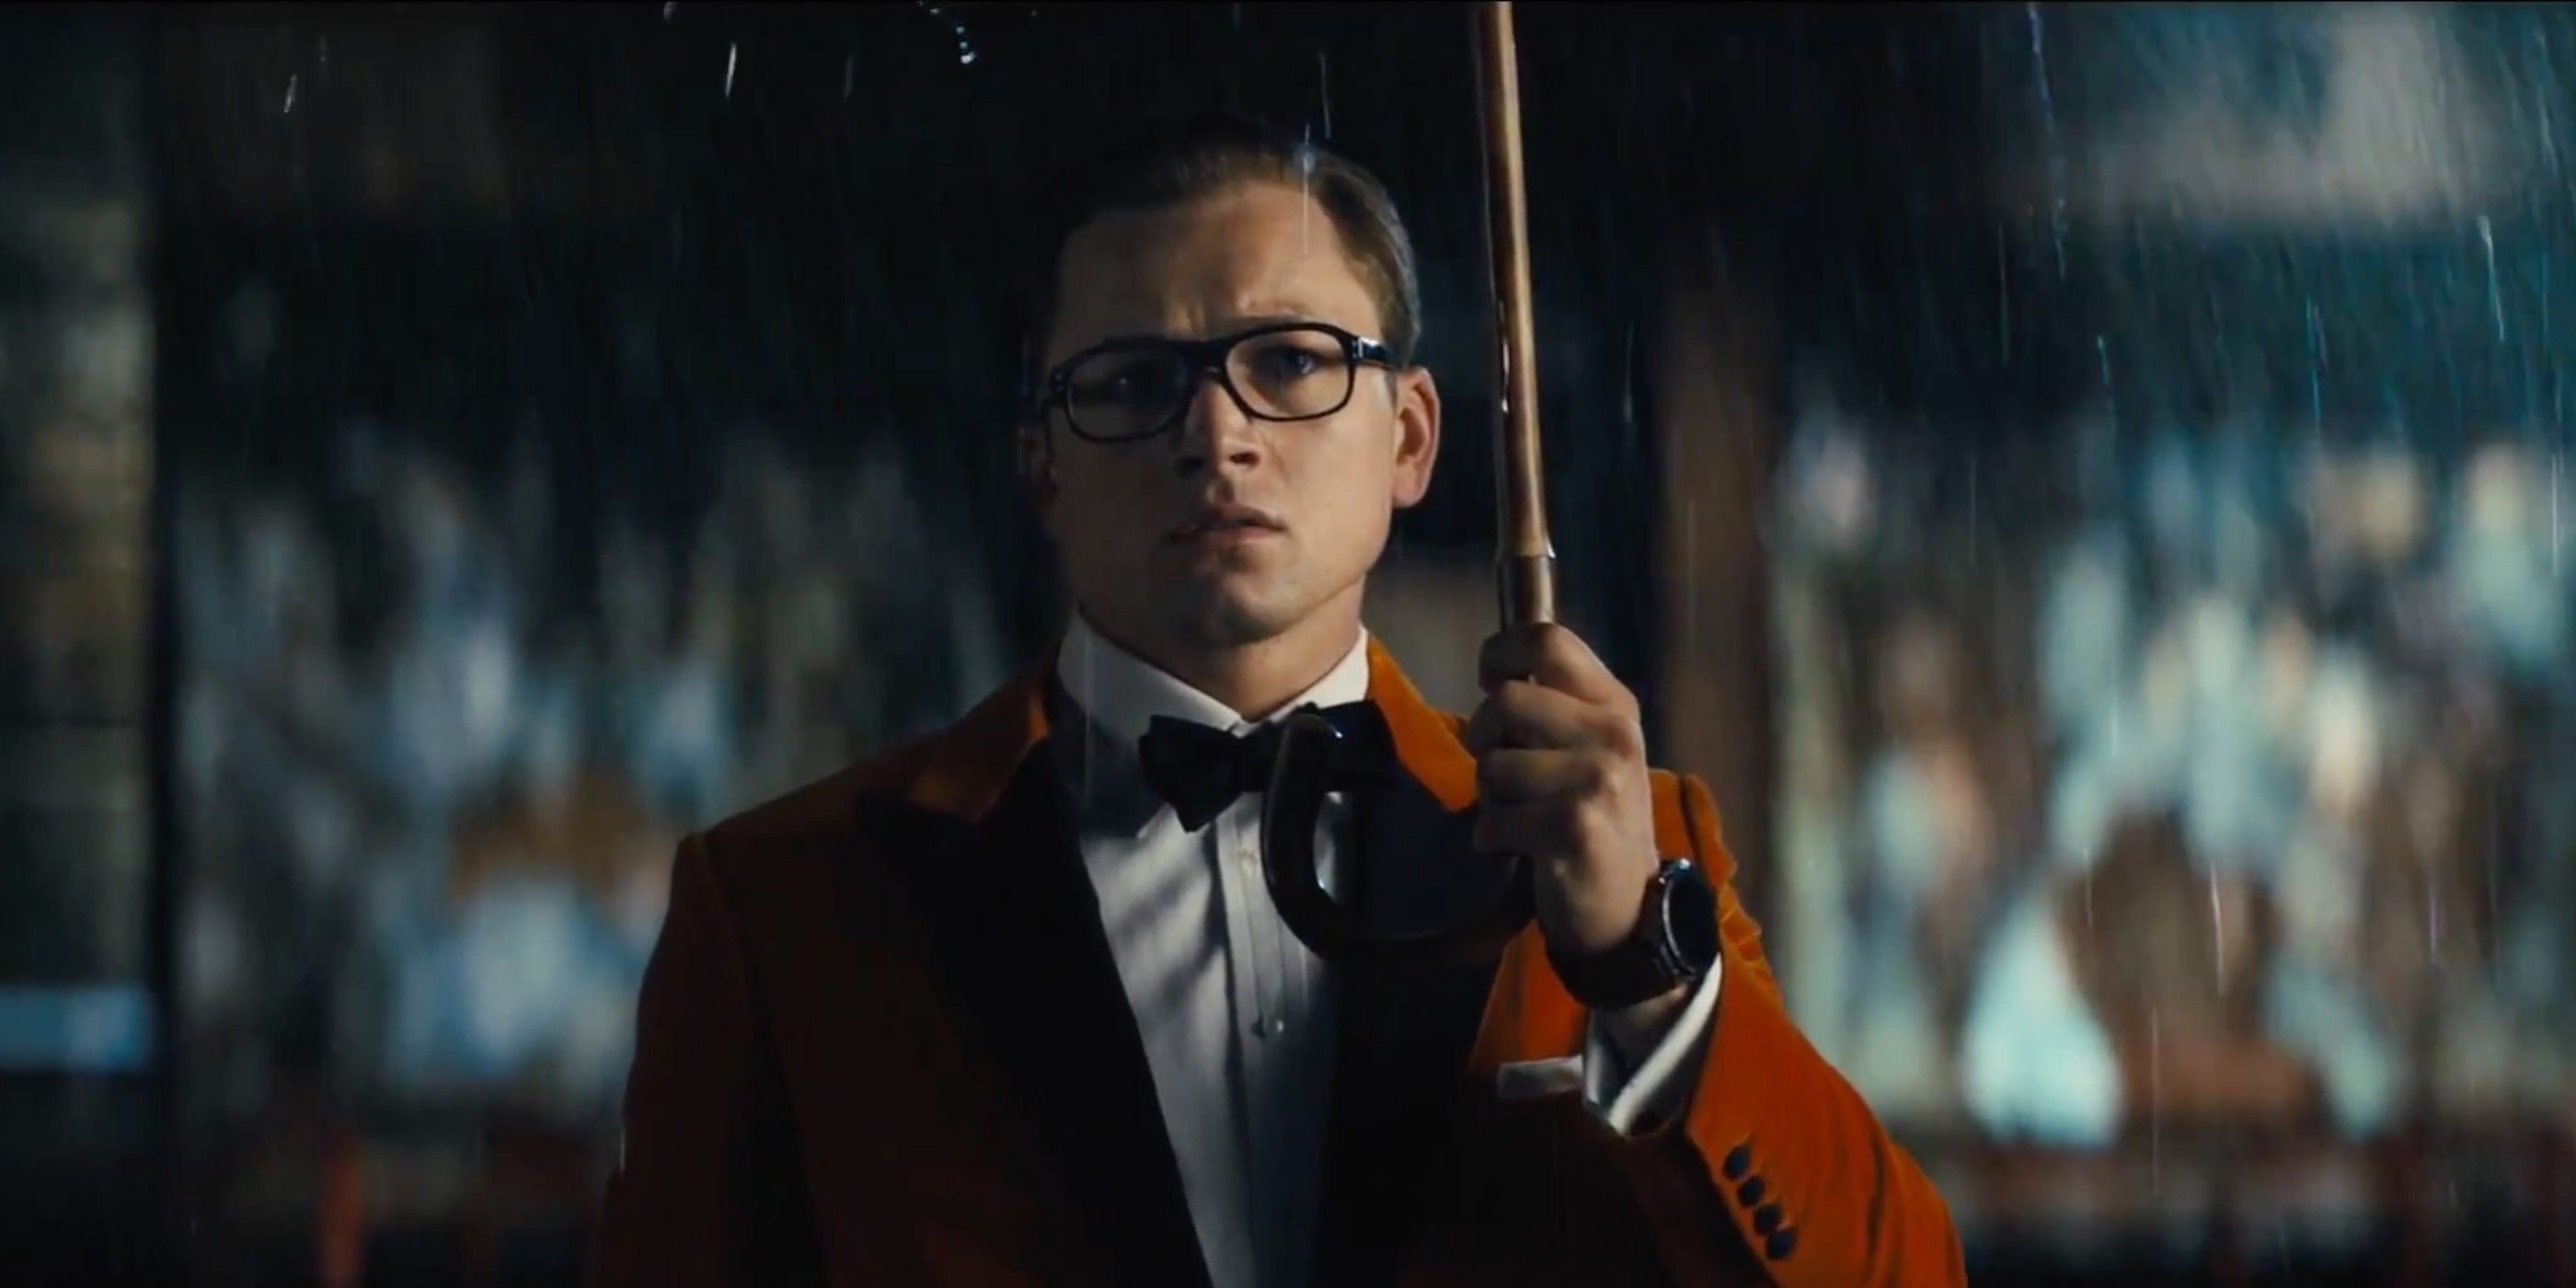 Eggsy holds his umbrella in the rain in Kingsman: The Golden Circle